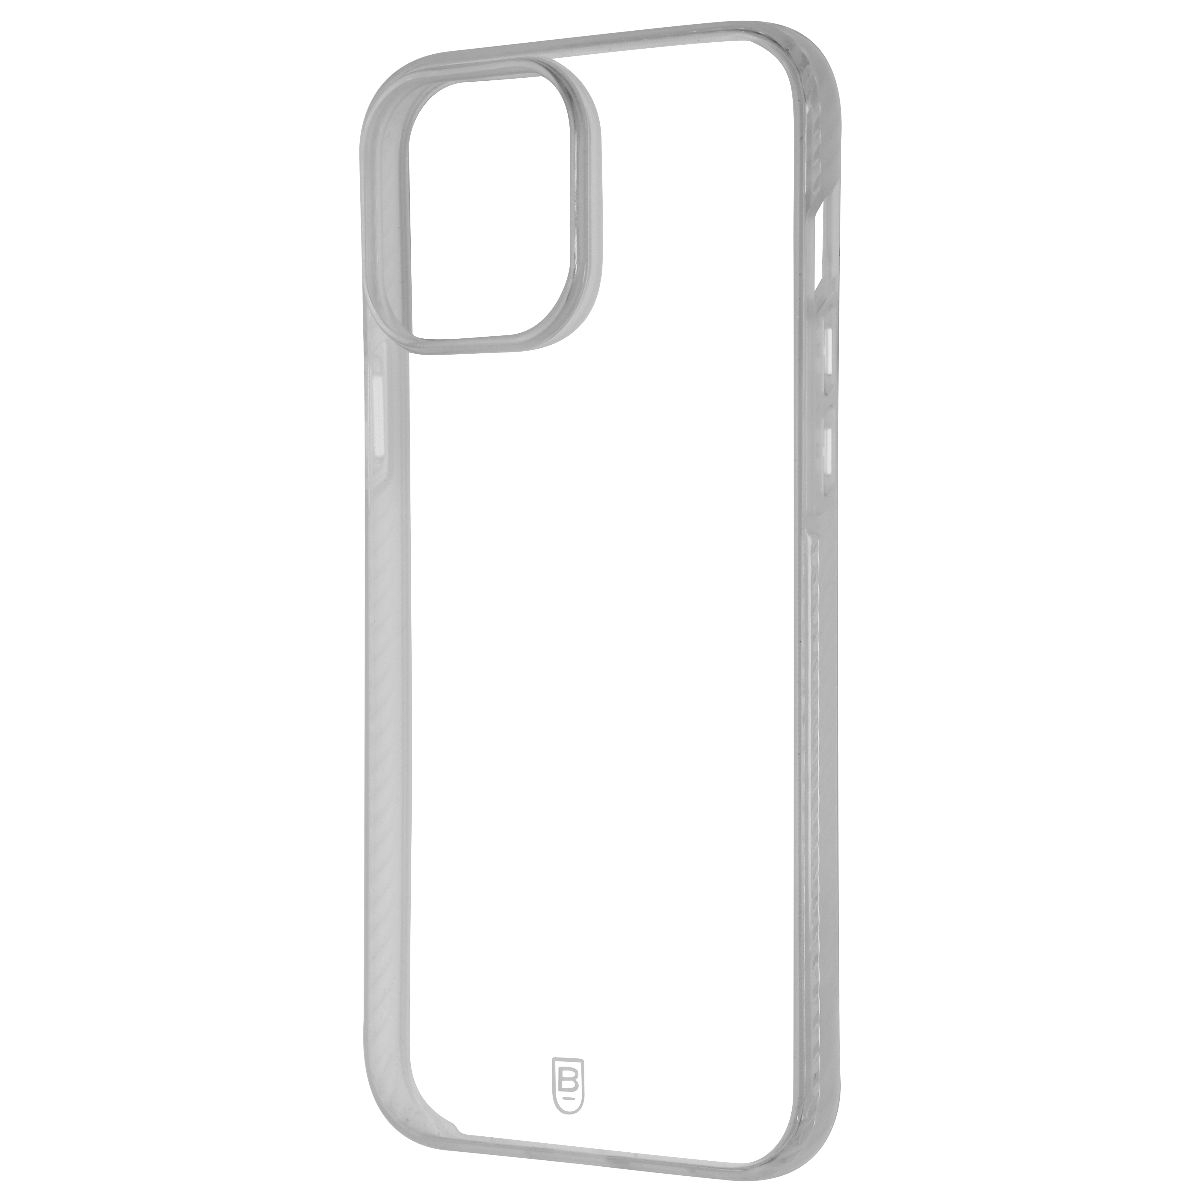 BodyGuardz Carve Series Case For IPhone 13 Pro Max - Clear (Refurbished)